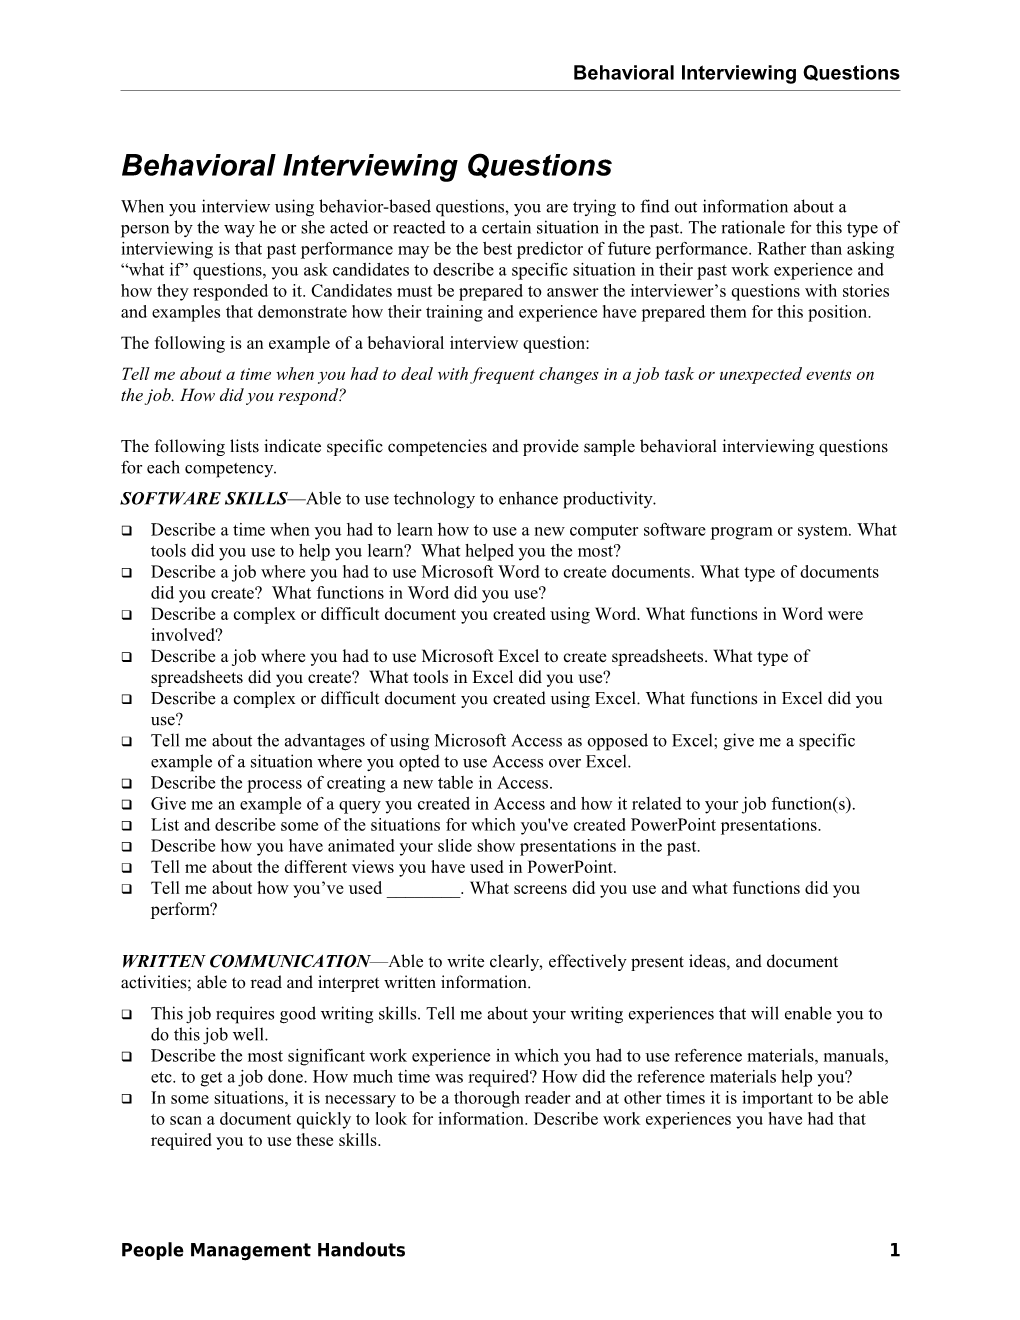 Behavioral Interviewing Questions s1